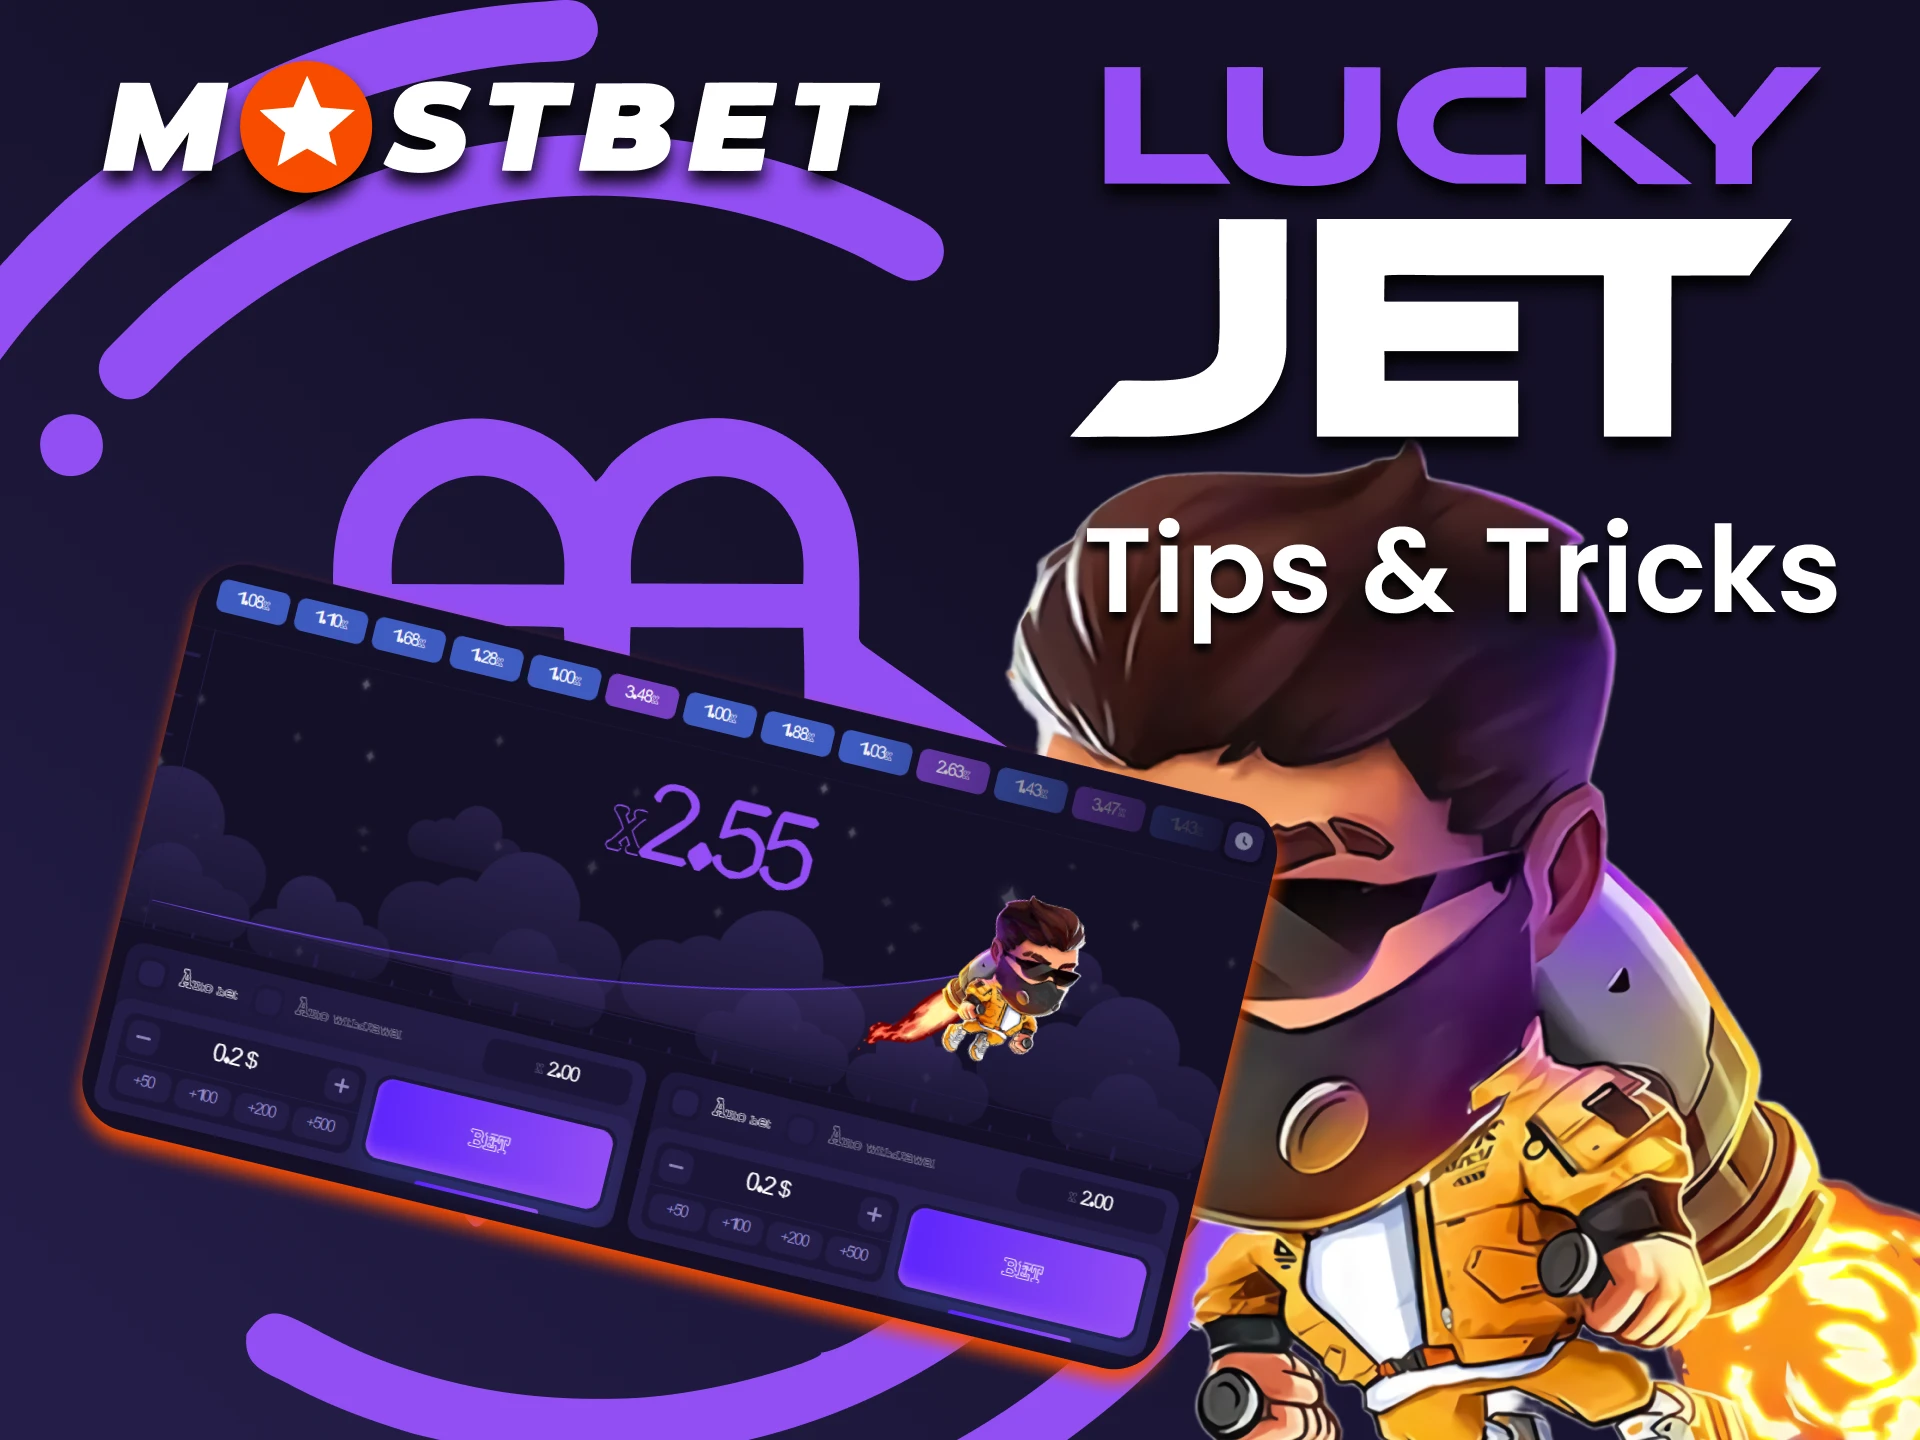 Get tips from other Lucky Jet players on Mostbet.